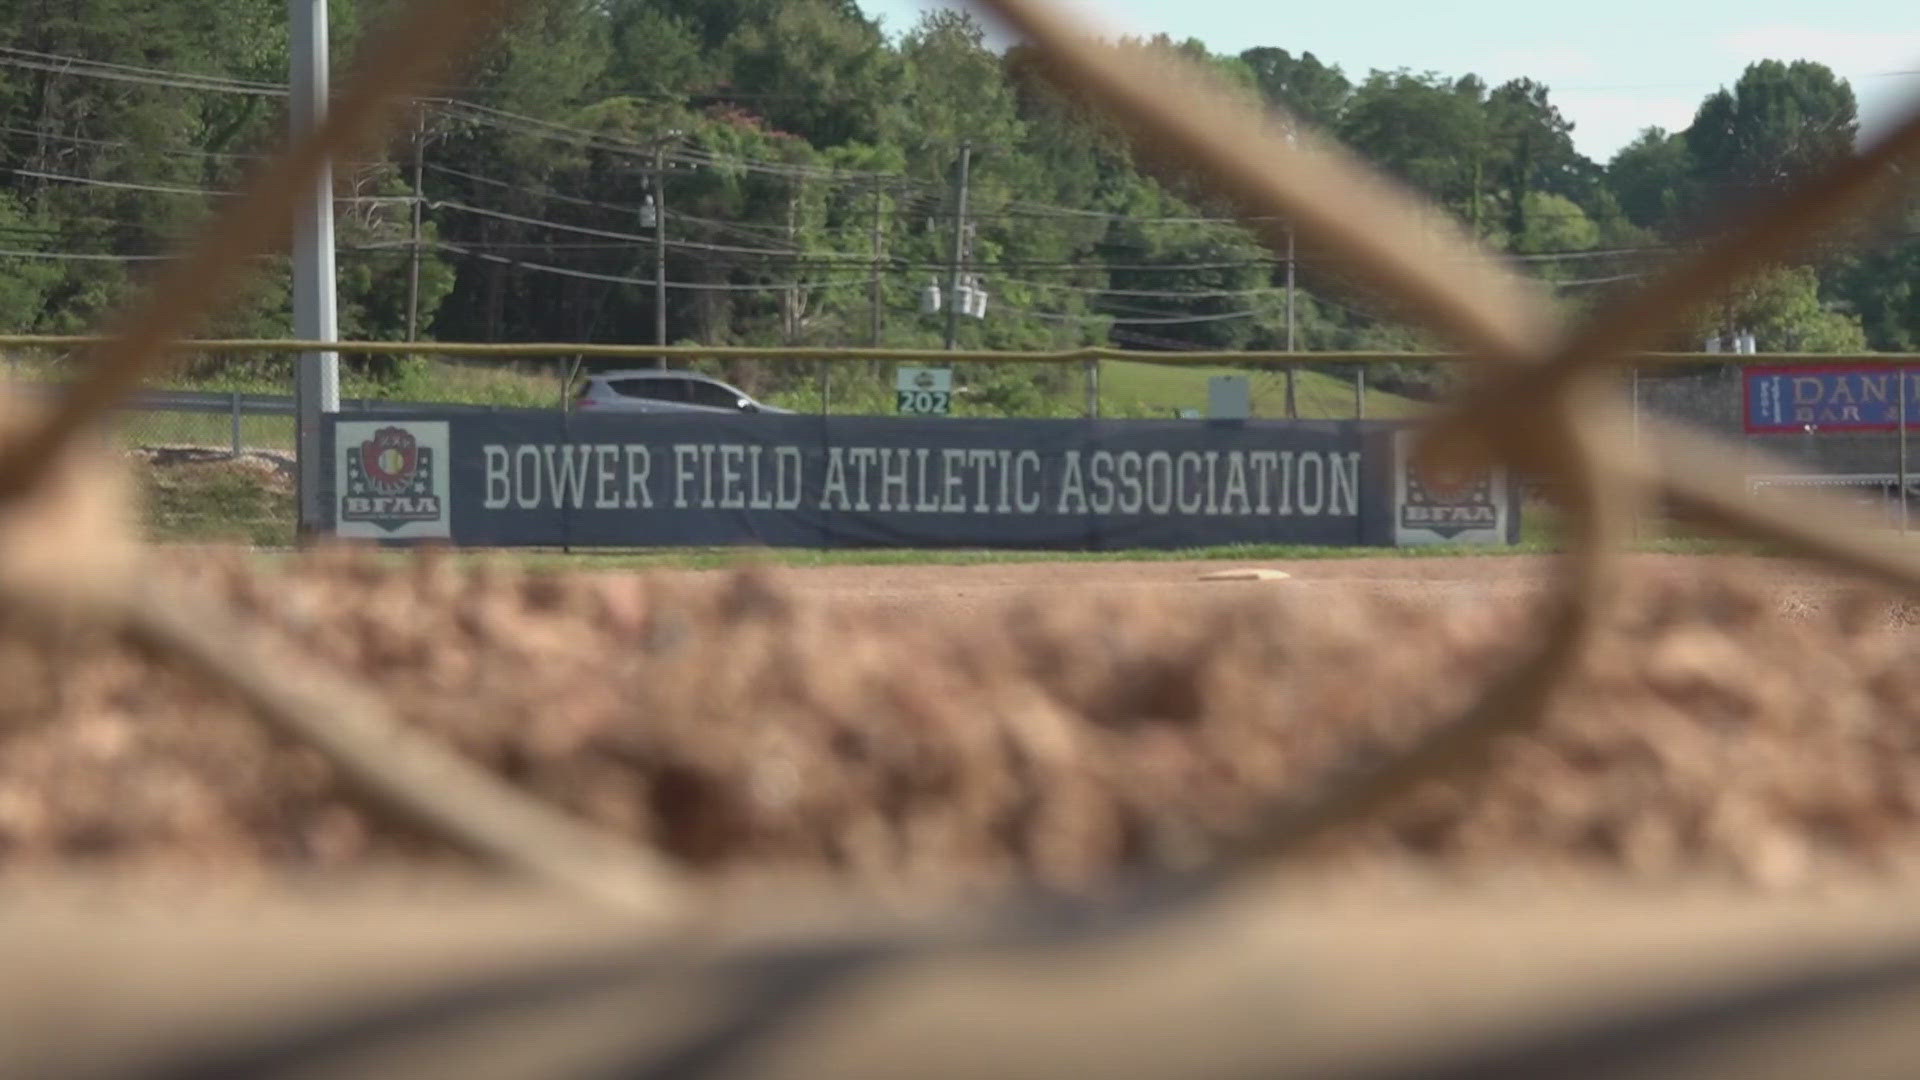 On Saturday, a group of community members are expected to gather and advocate against changing the zoning rules around Bower Field Park.